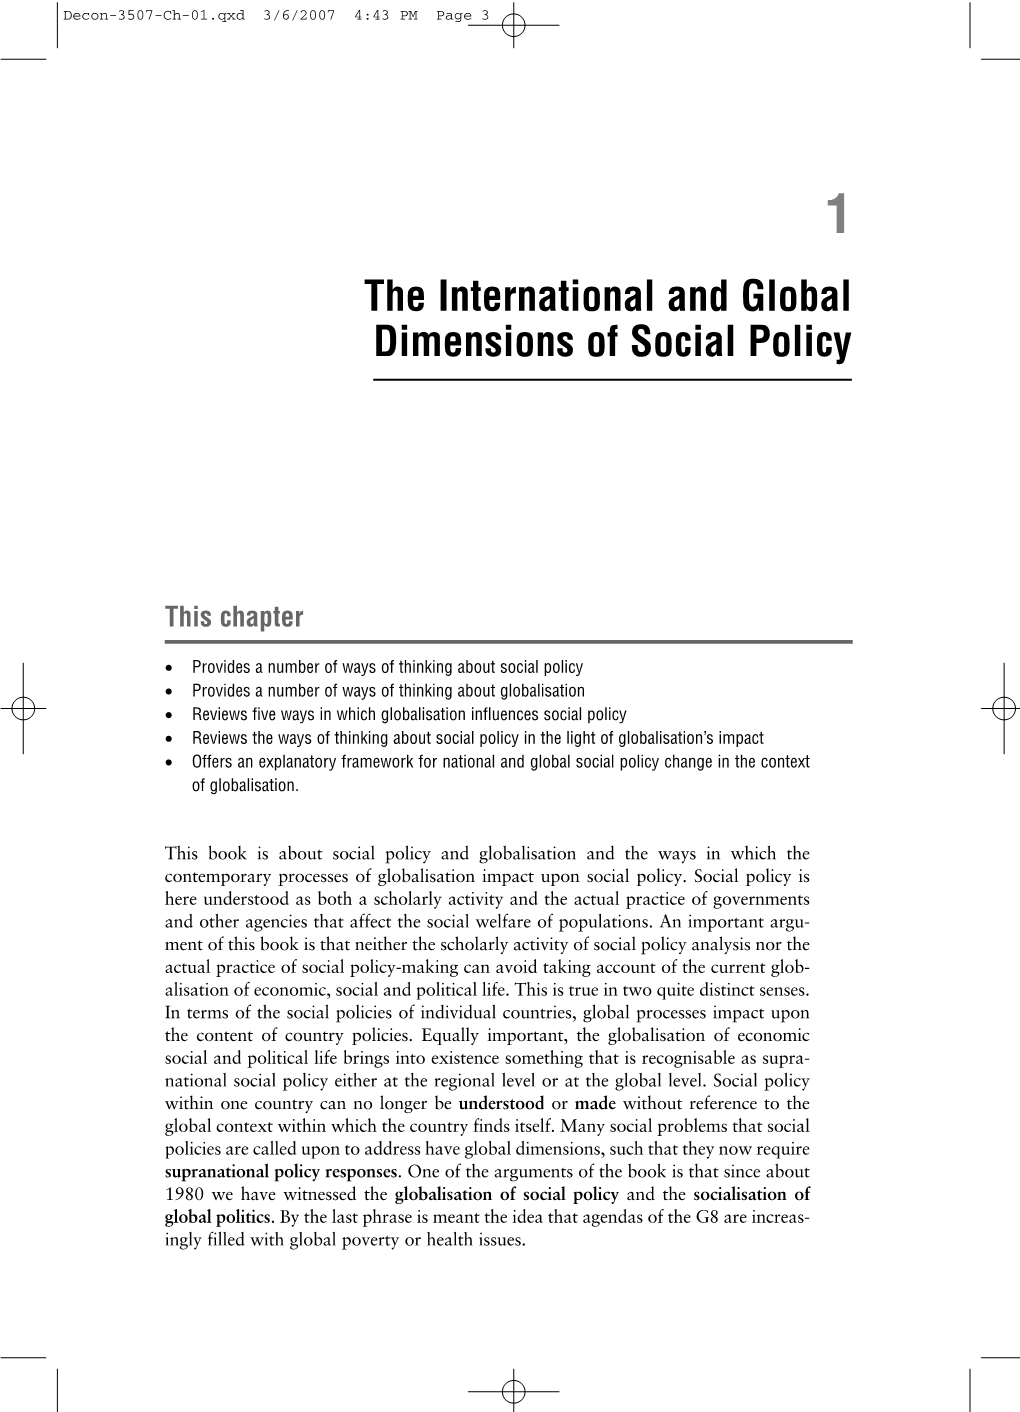 The International and Global Dimensions of Social Policy